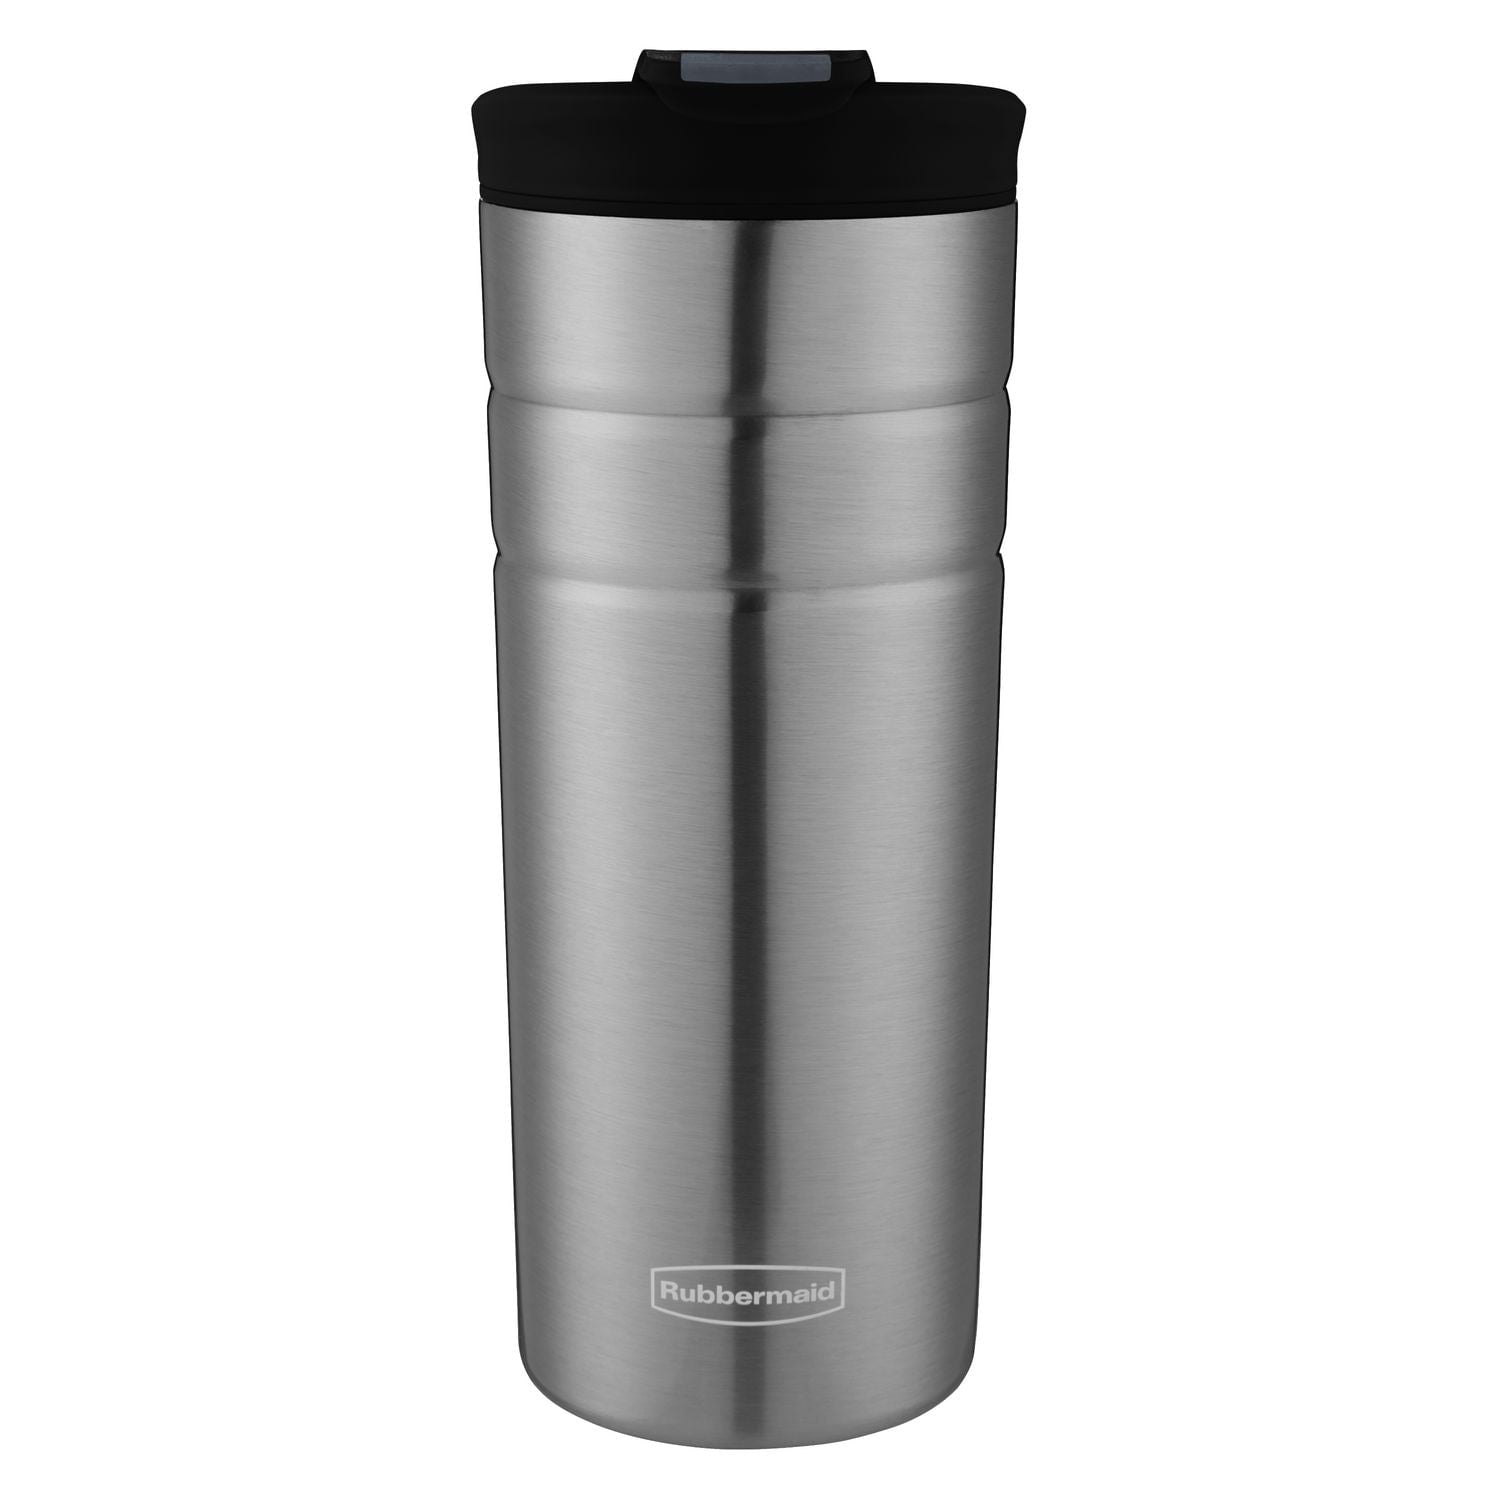 Rubbermaid Vacuum Tumbler - 16 oz. (Item No. 164212-OL) from only